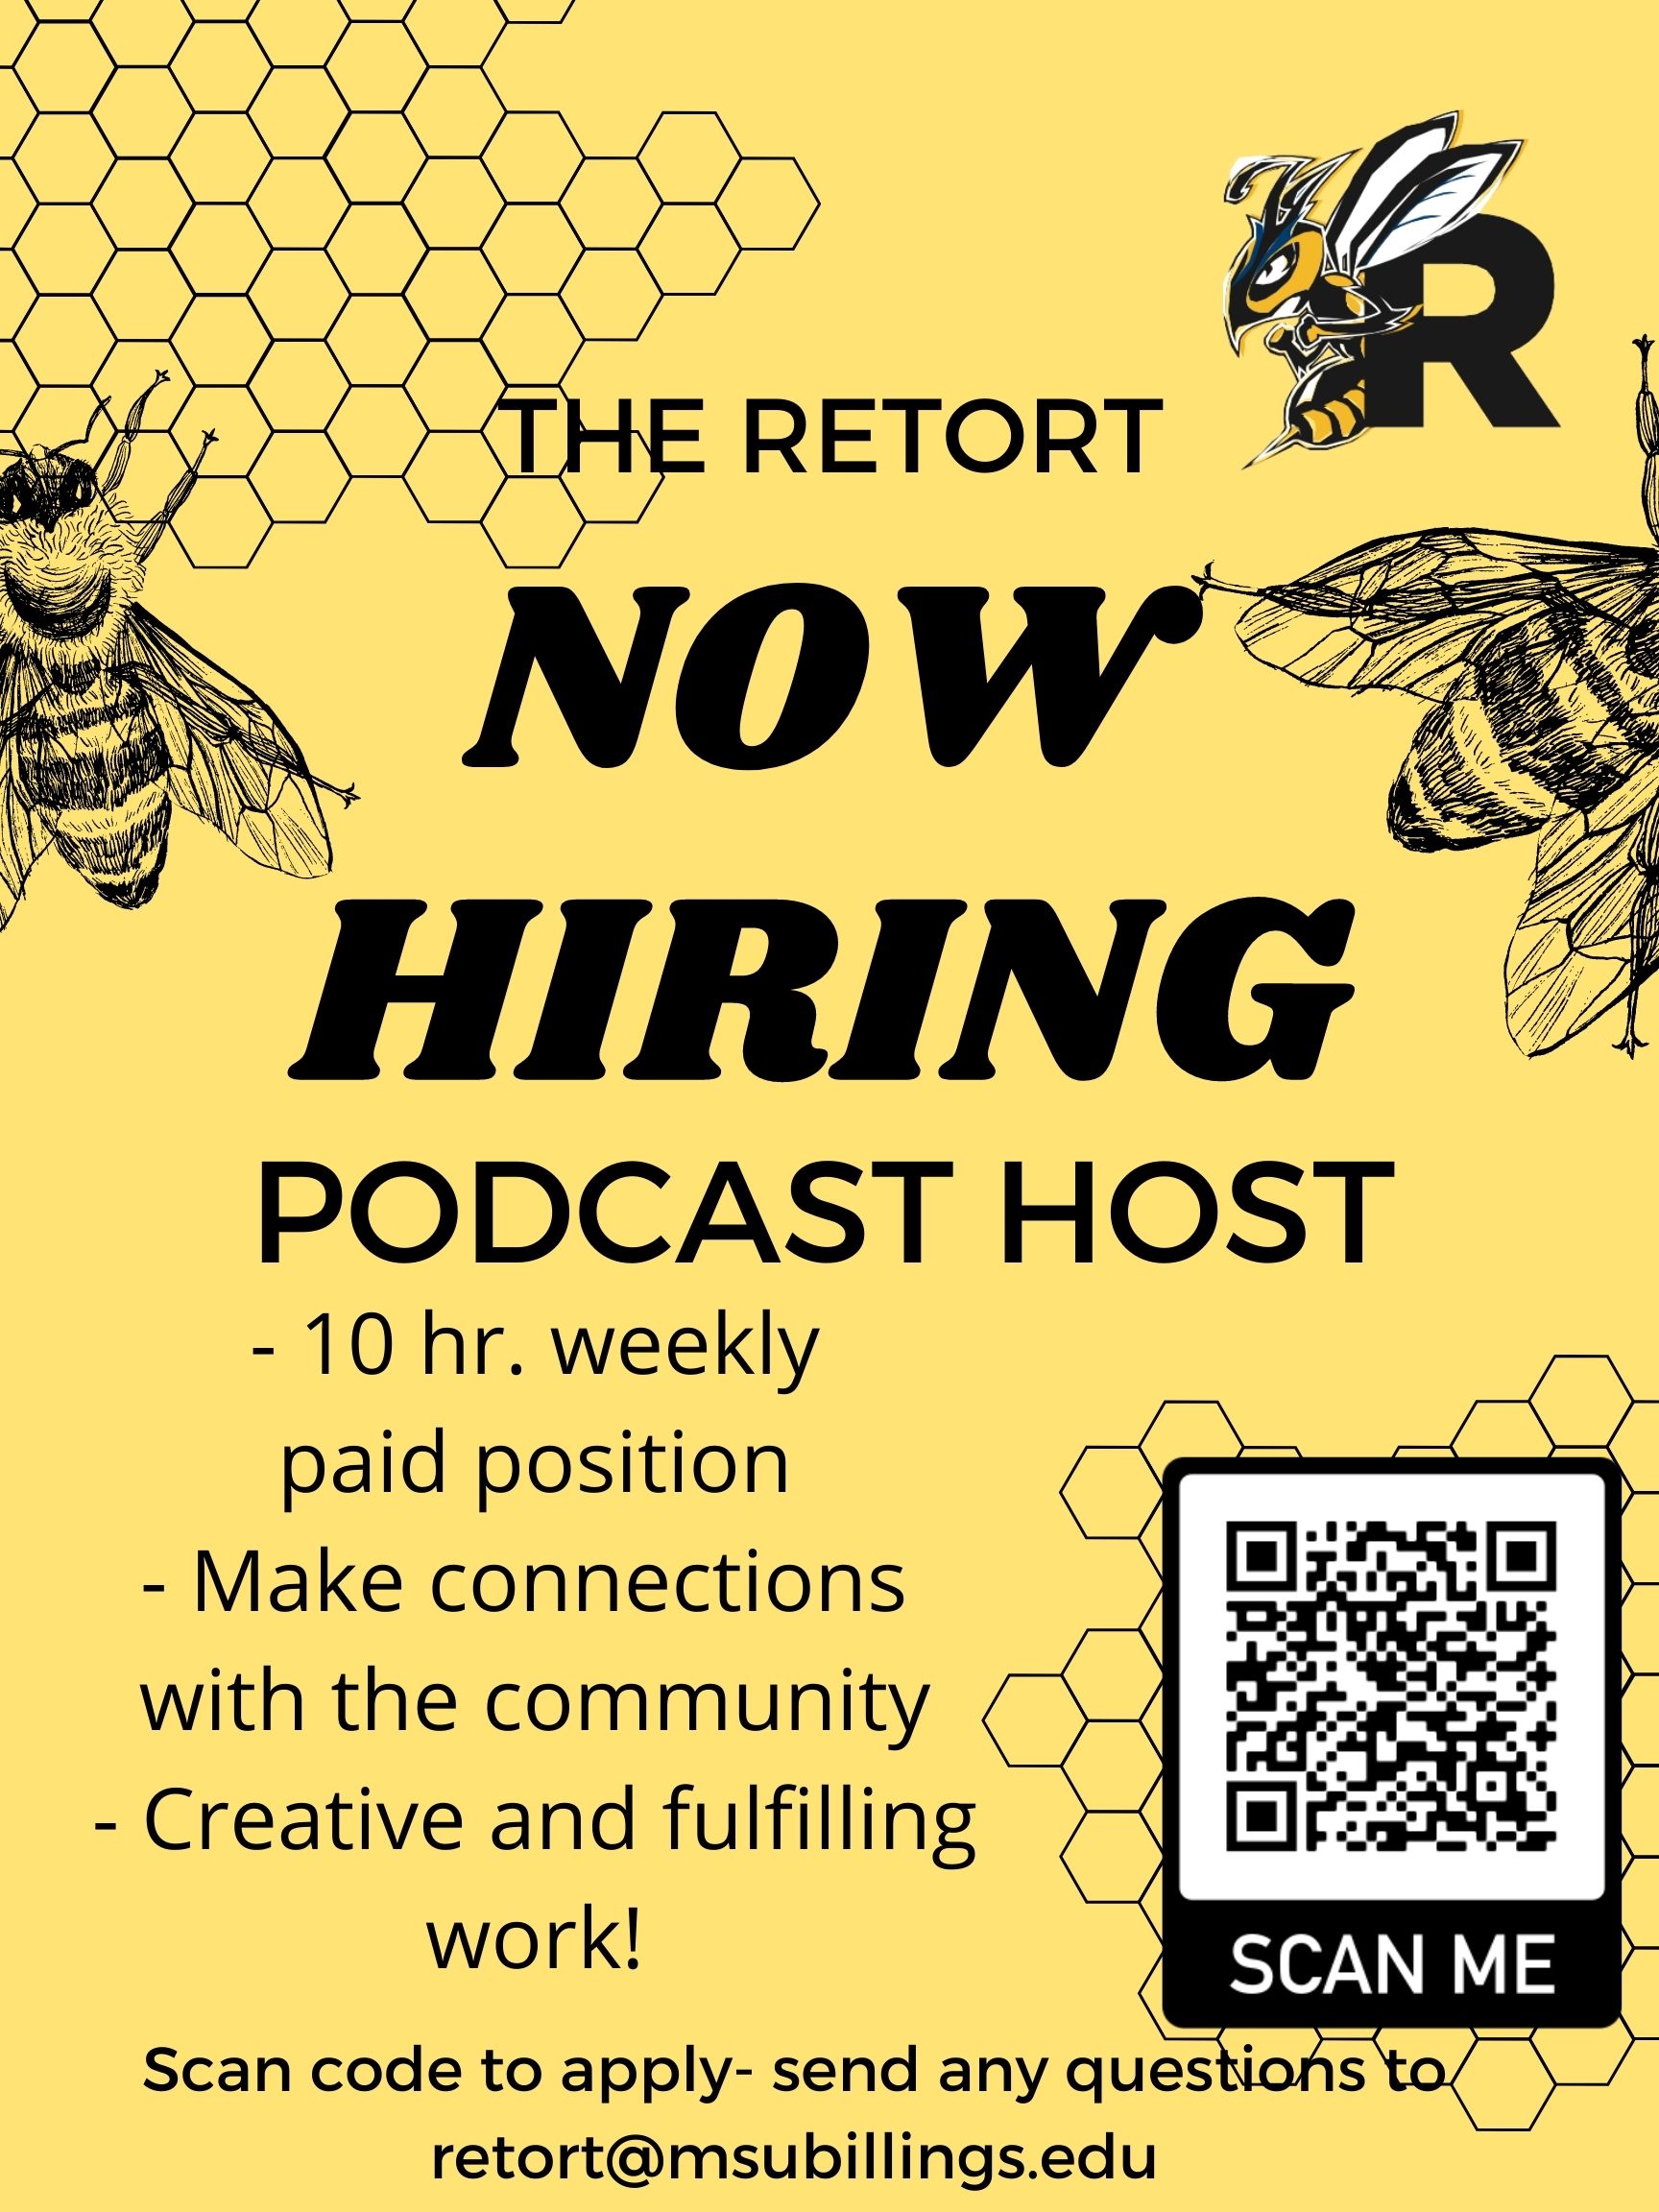 The Retort, now hiring Podcast Host: 10 hr weekly paid position, make connections with the community, creative and fulfilling work!